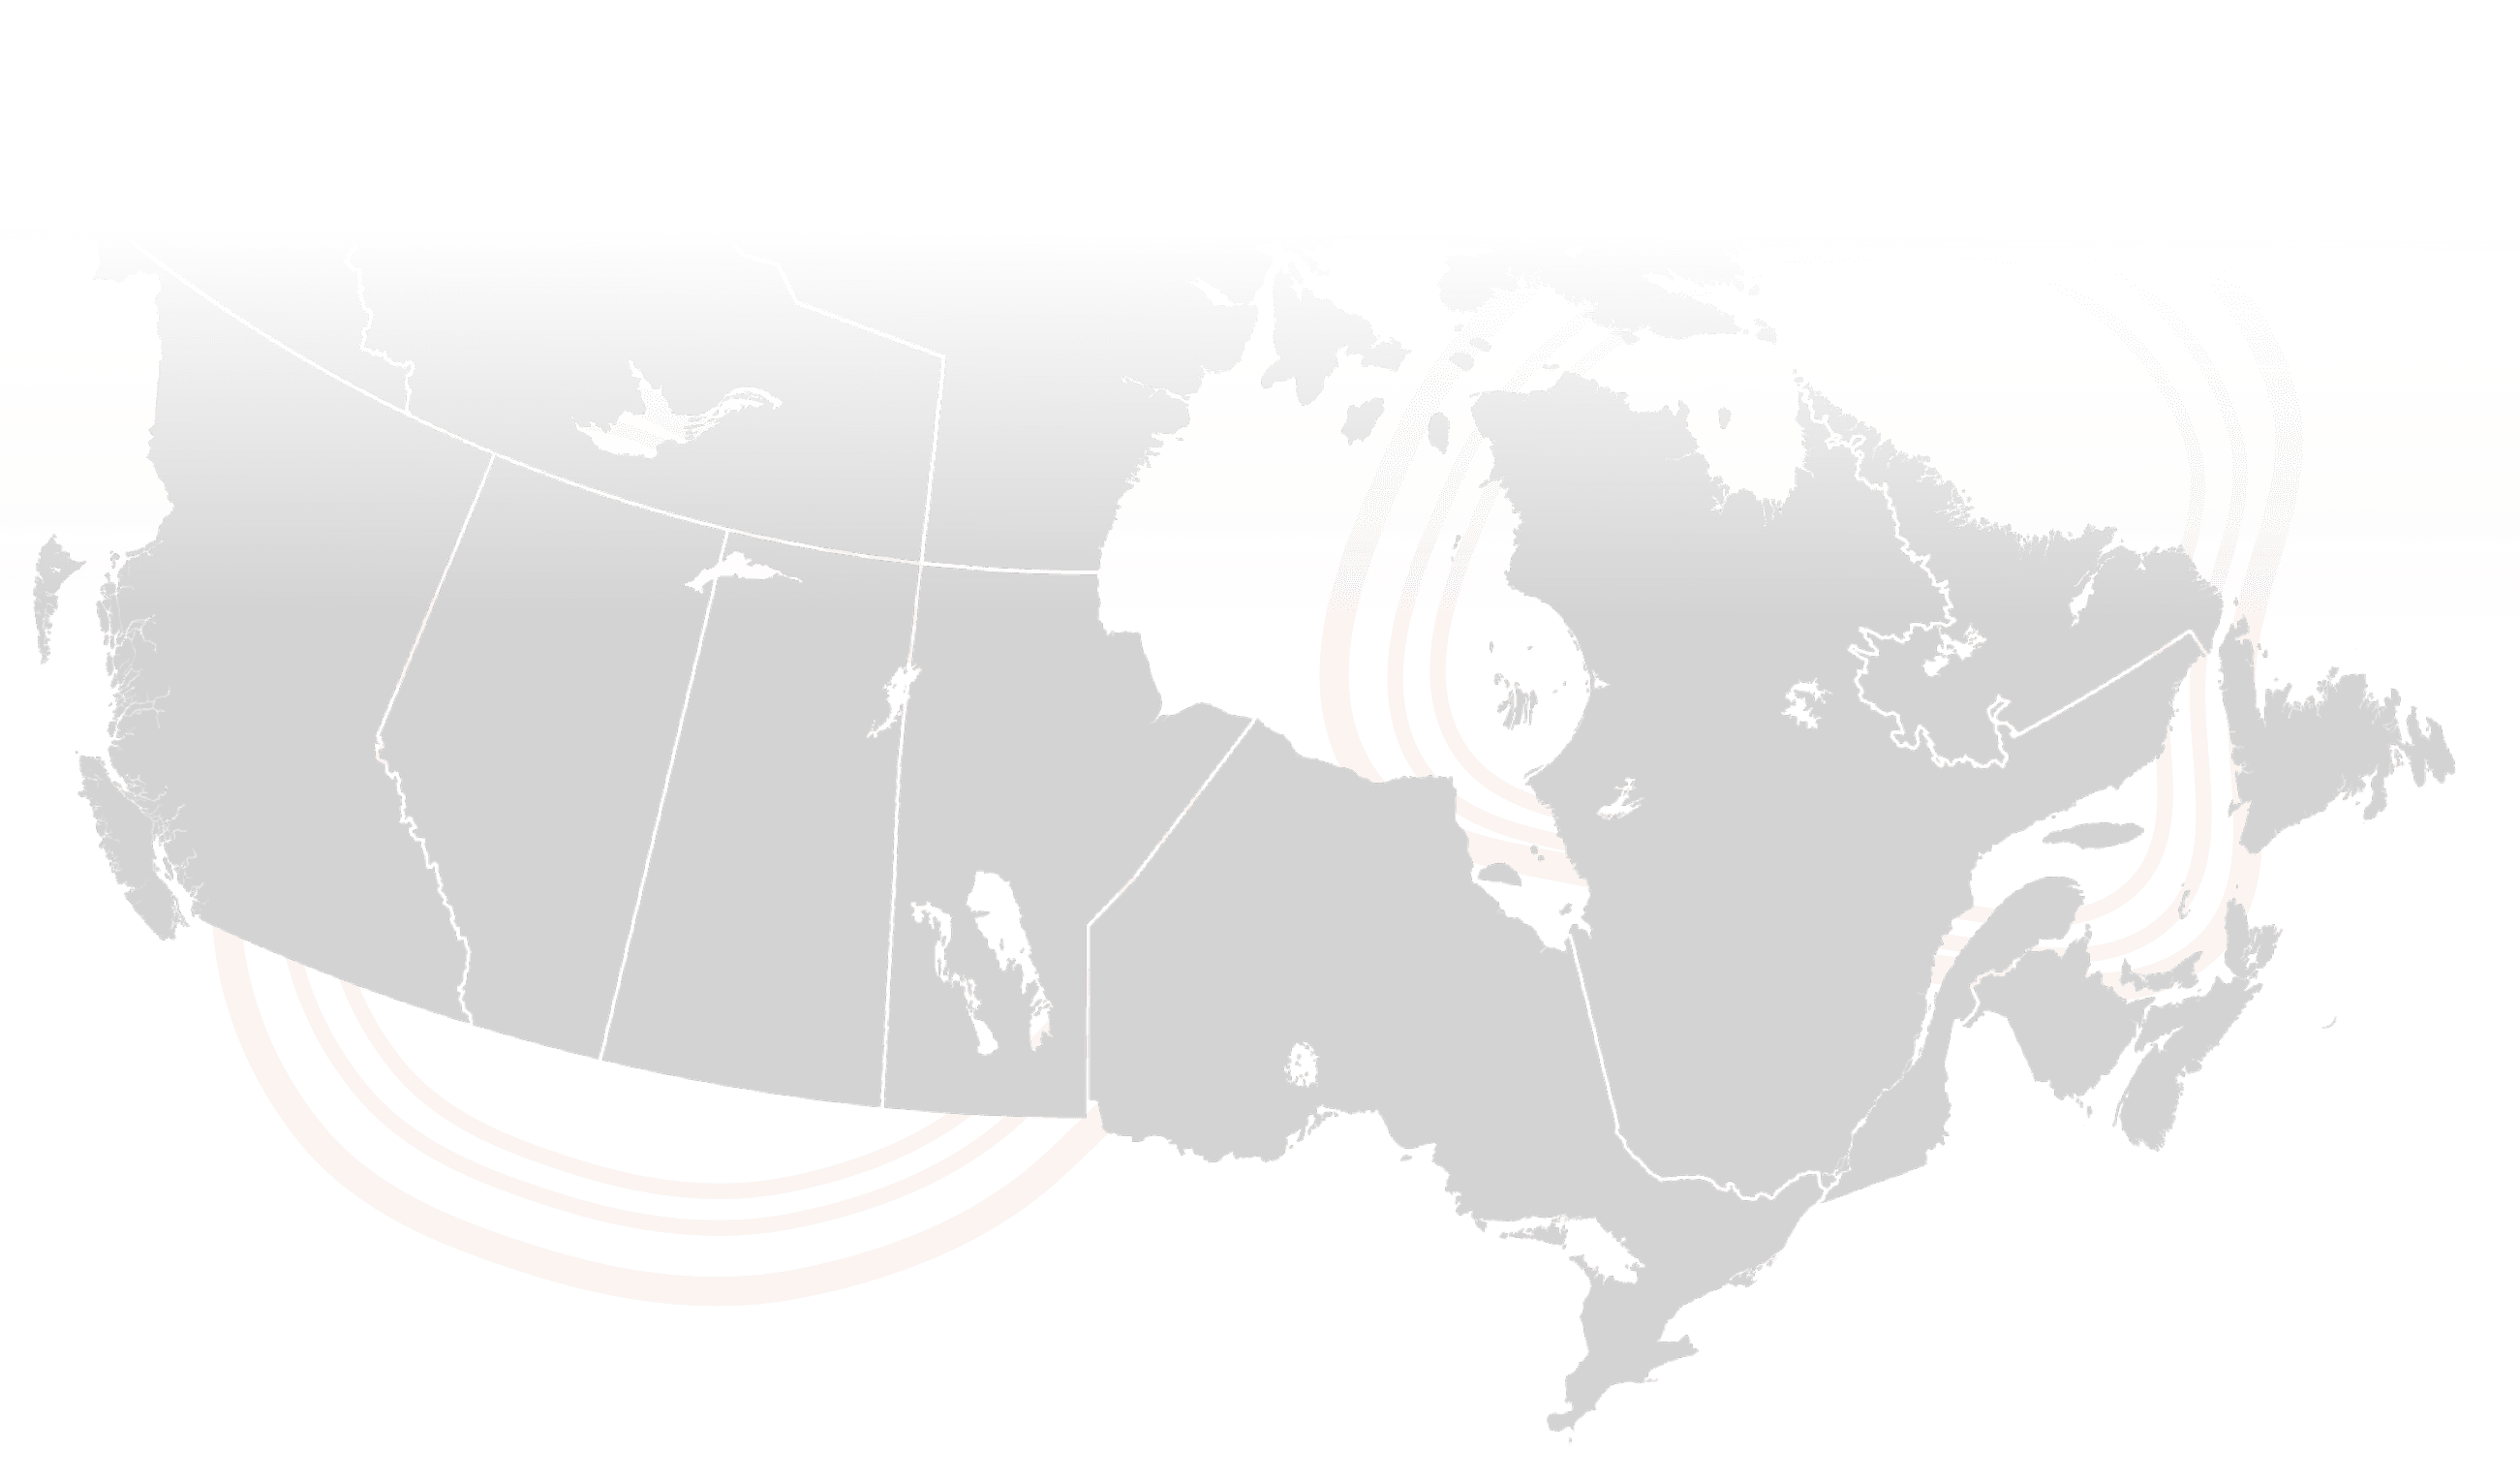 Map of Canada with Plato Delivery Centers listed from left to right: Victoria, Vancouver, Kamloops, Calgary, Regina, Sault Ste. Marie, Toronto, Ottawa, Miramichi, Fredericton, Halifax